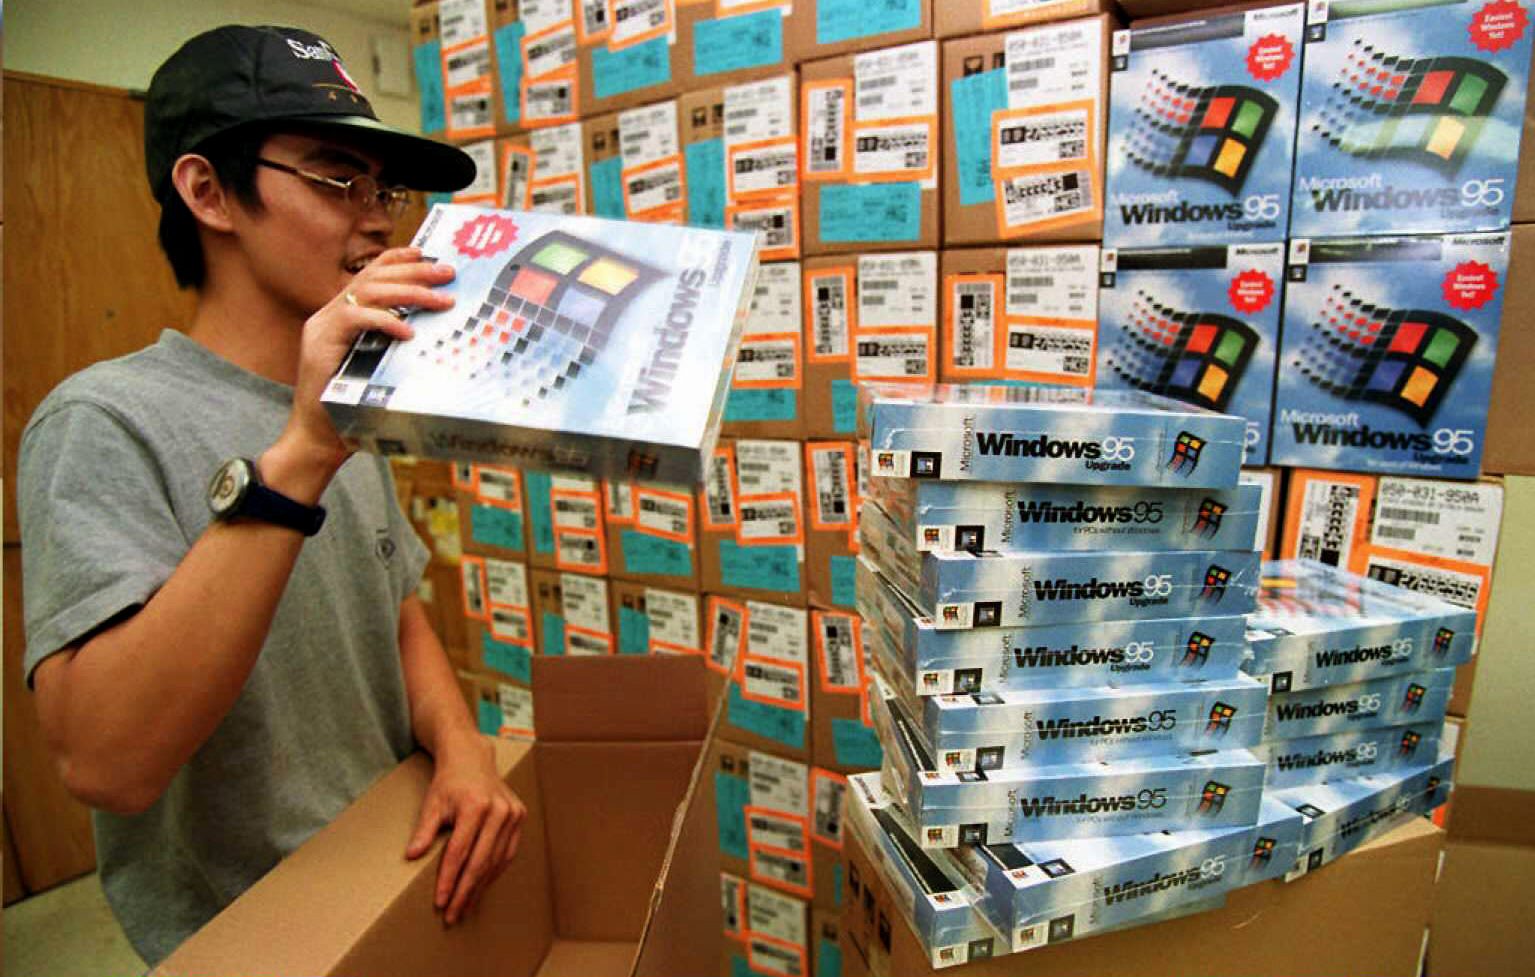 PHOTO: A computer wholesale distributor piles up the newly arrived Window 95 software, Aug. 23, 1995.